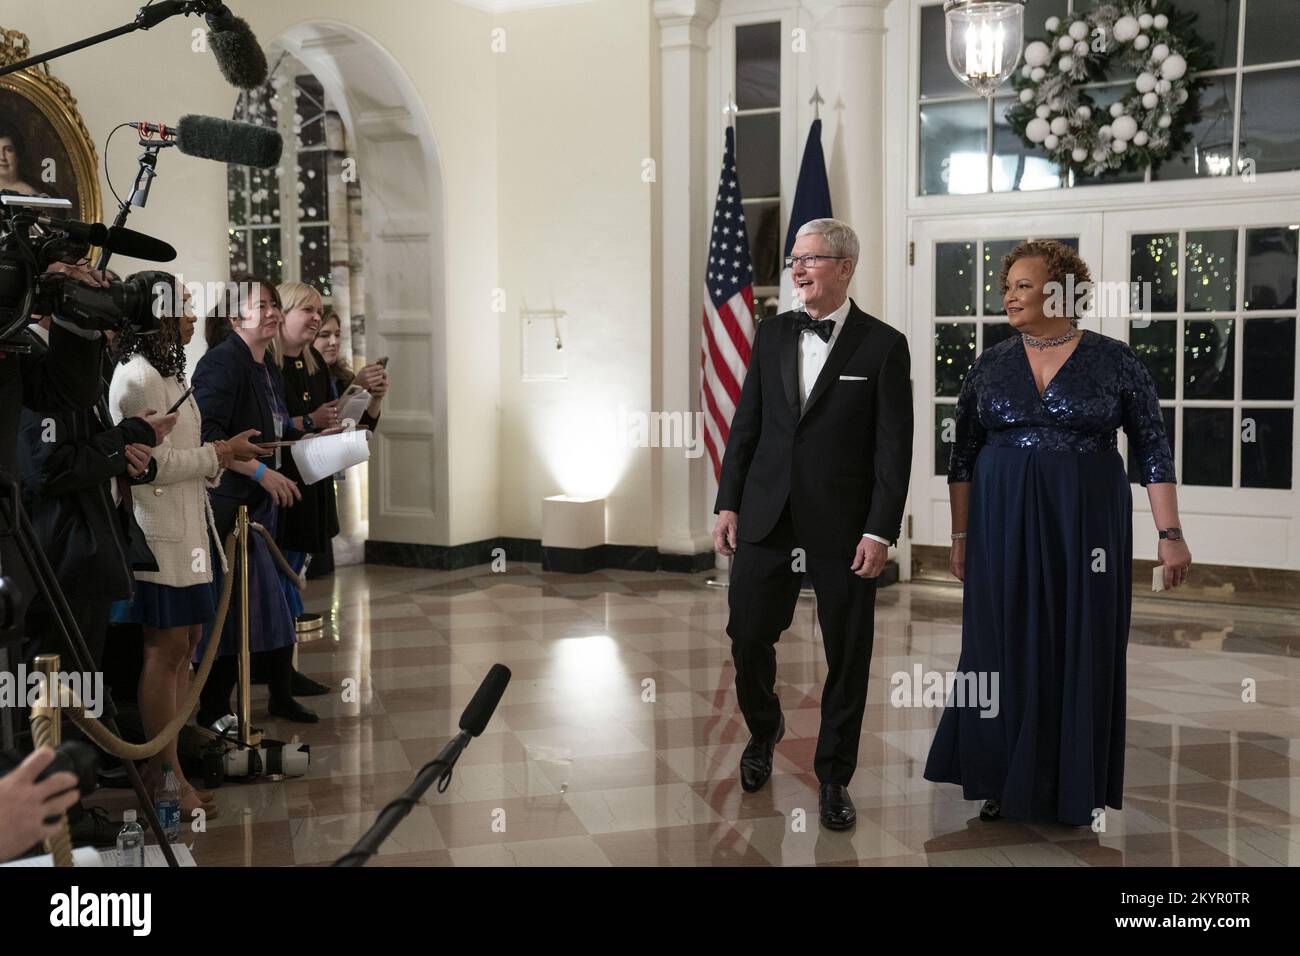 Washington, United States. 01st Dec, 2022. Timothy Cook, CEO of Apple, and Lisa Jackson, Former Administrator of the U.S. Environmental Protection Agency, arrive to attend a State Dinner in honor of President Emmanuel Macron and Brigitte Macron of France hosted by United States President Joe Biden and first lady Dr. Jill Biden at the White House in Washington, DC on Thursday, December 1, 2022. Photo by Sarah Silbiger/UPI Credit: UPI/Alamy Live News Stock Photo